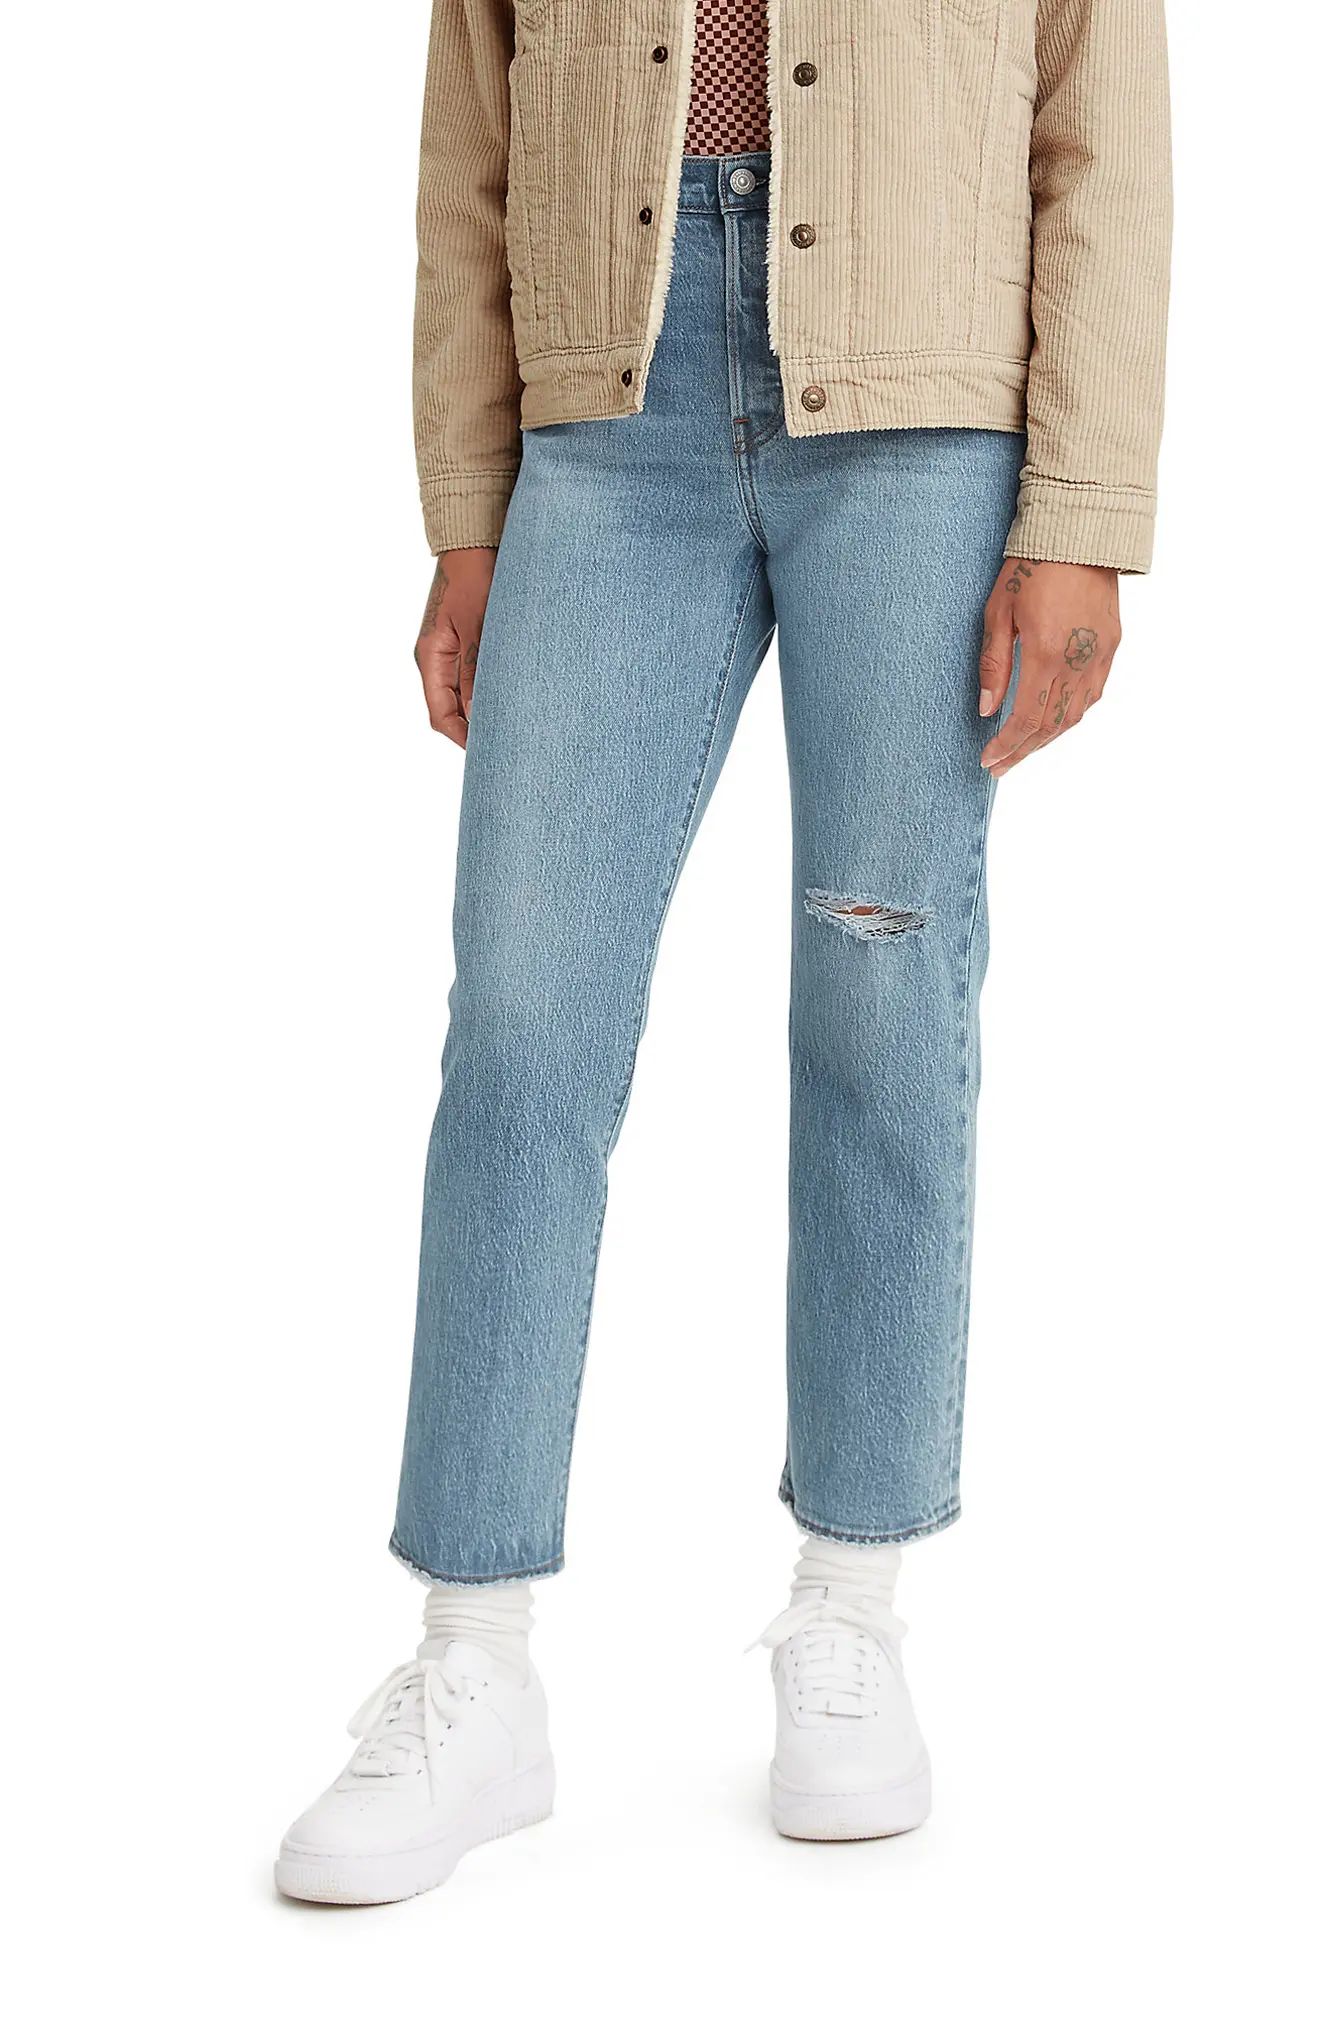 levi's Wedgie Straight Leg Jeans in Salsa Spice at Nordstrom, Size 30 X 28 | Nordstrom